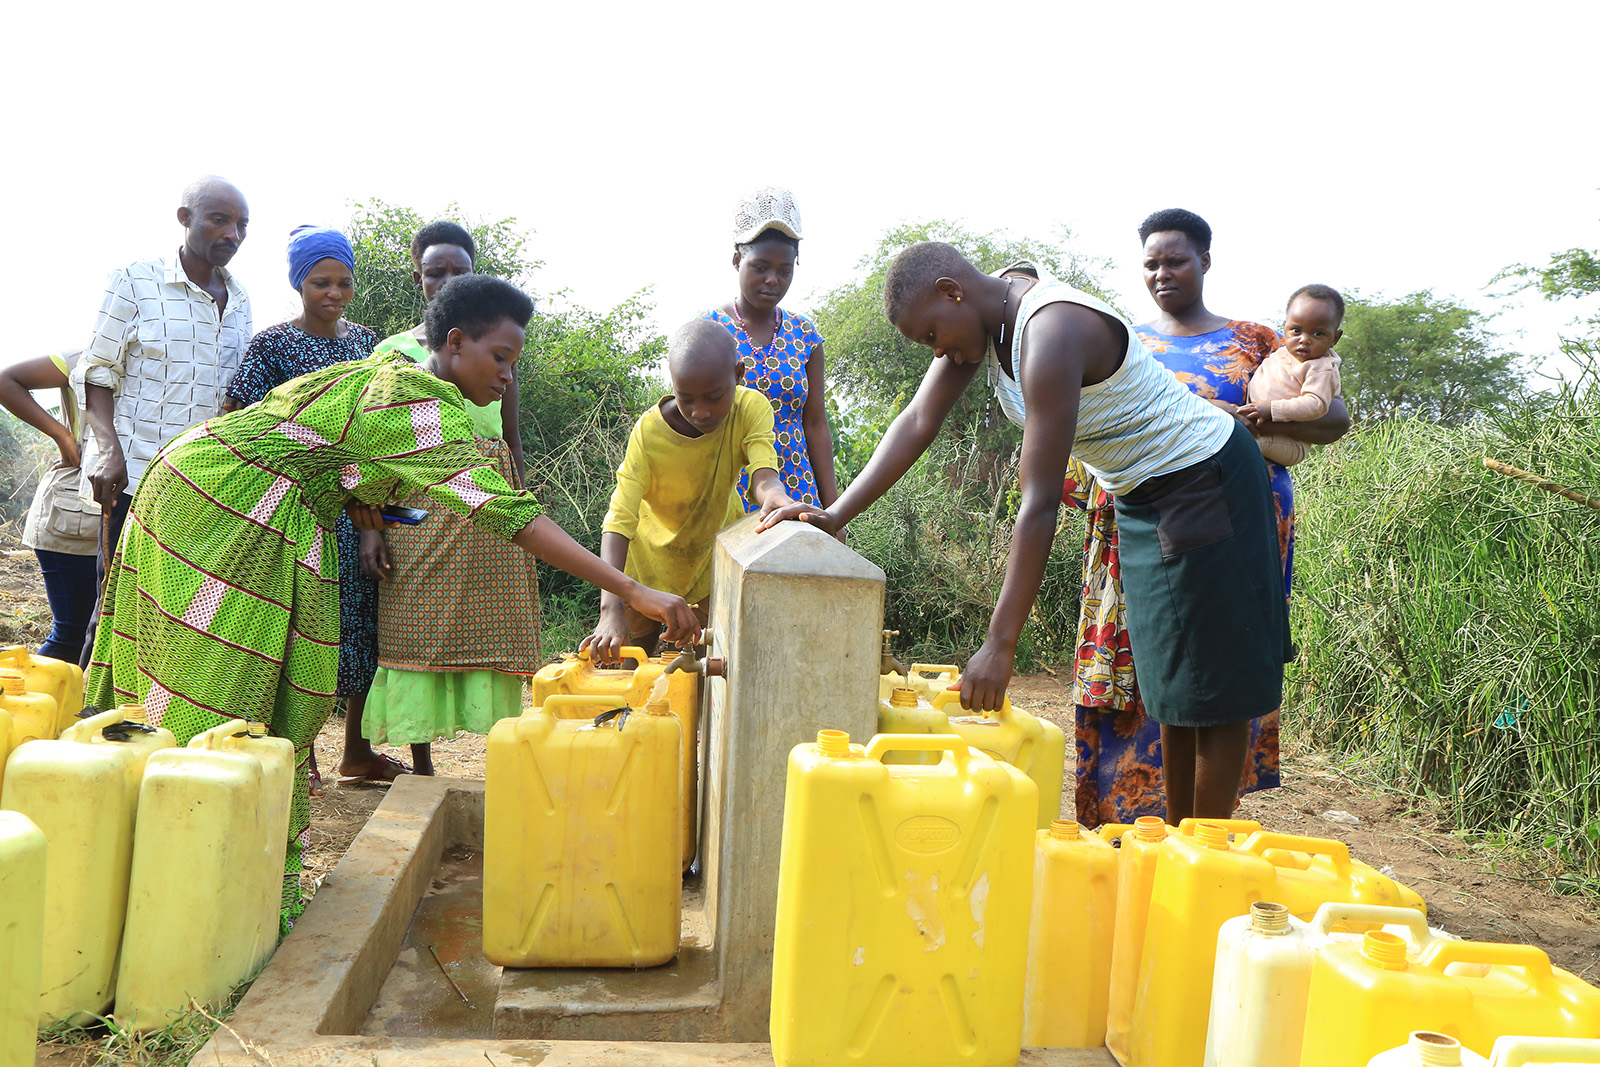 People filling up jerry cans with water at a water tap